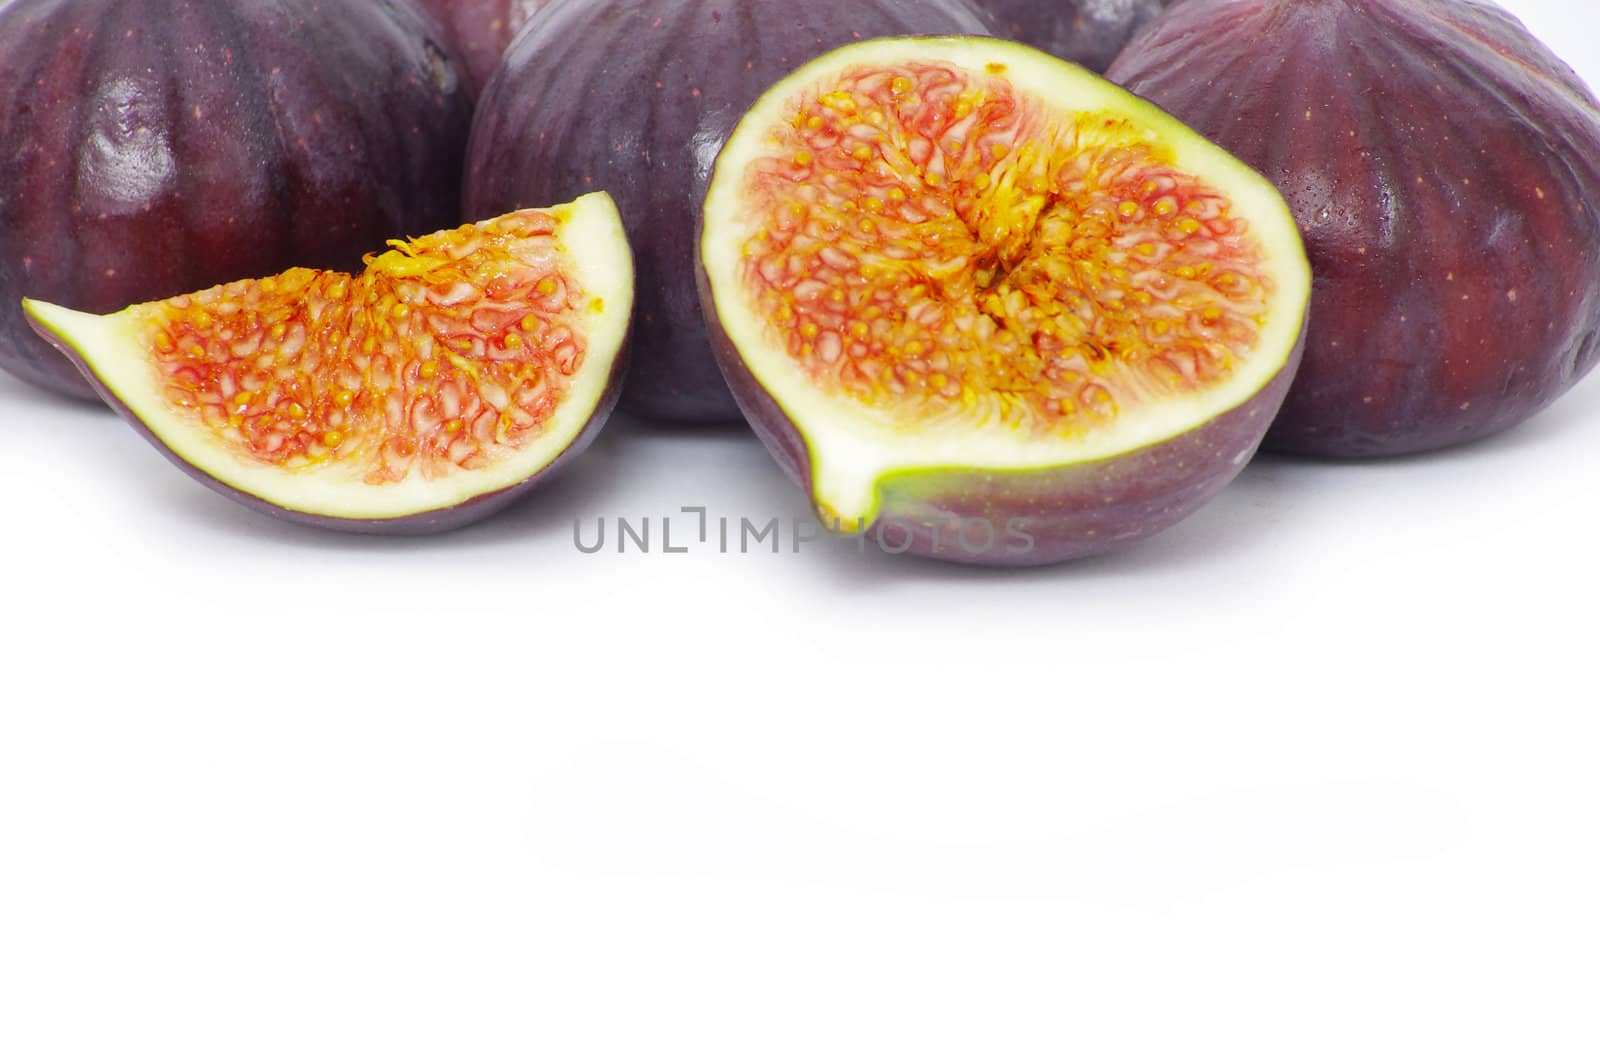 Fresh figs isolated on white